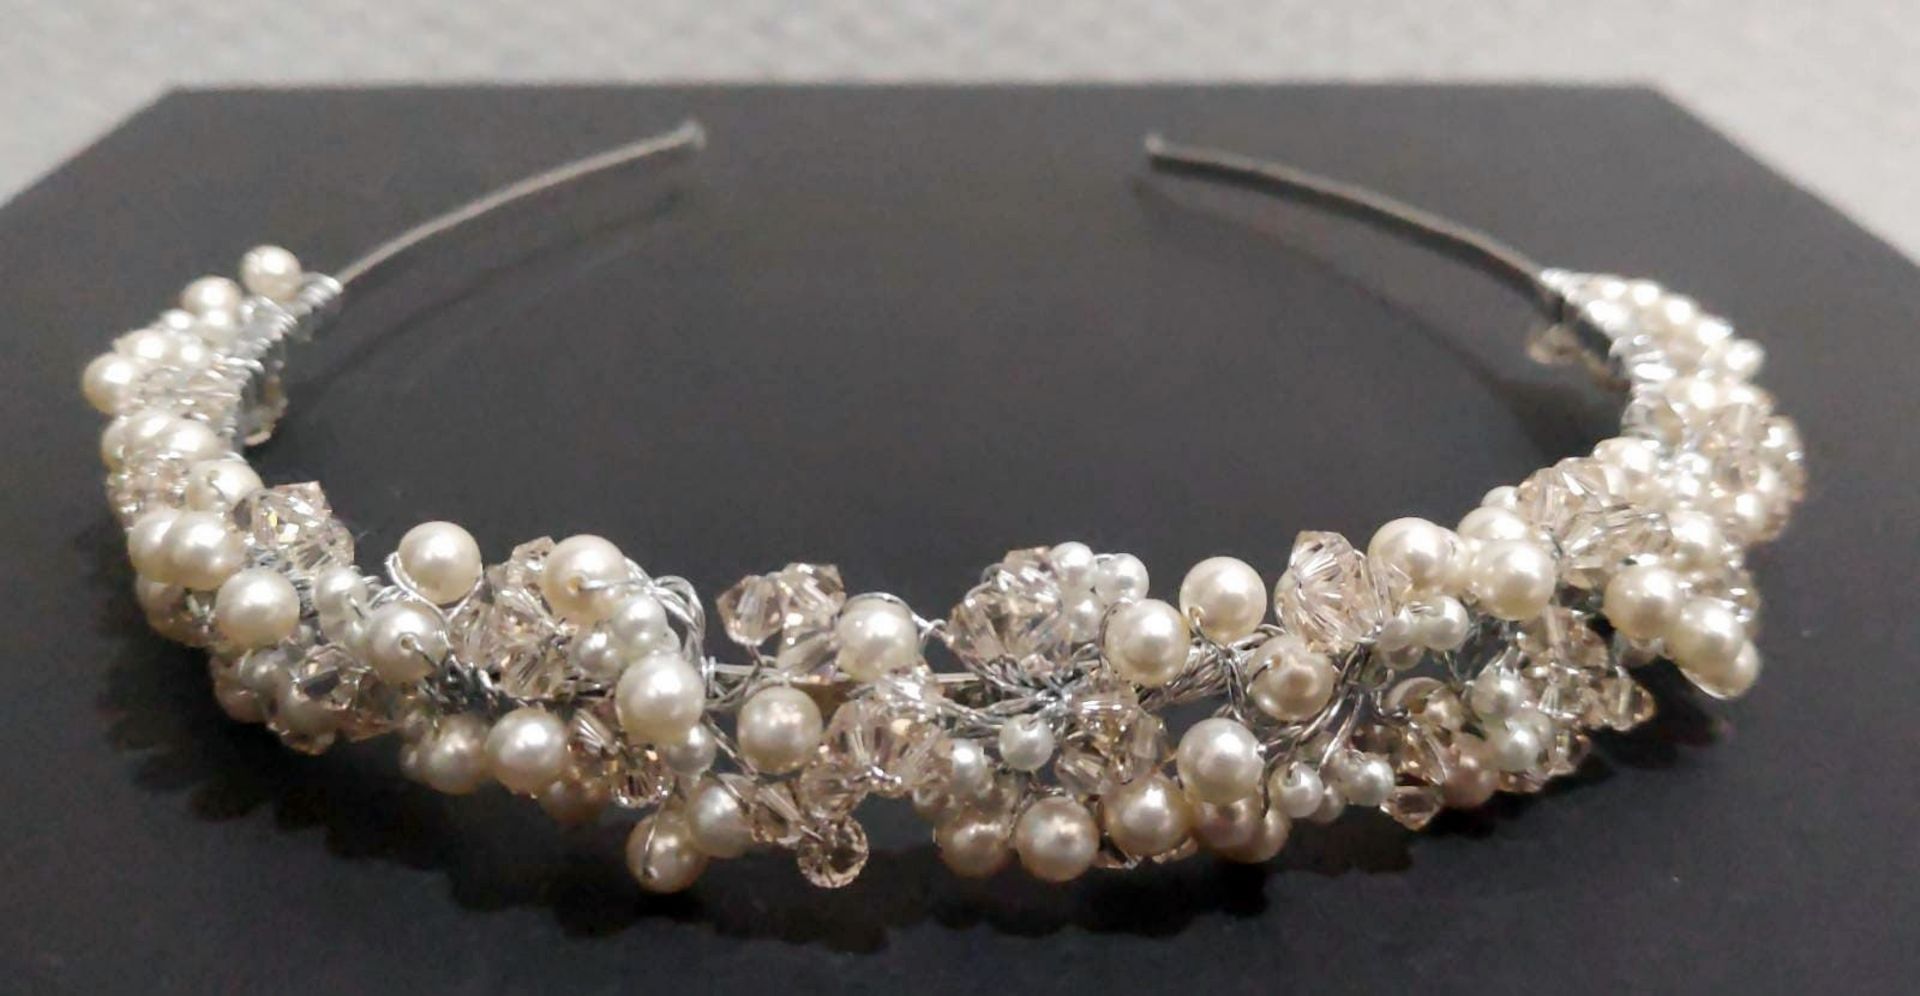 Lot of 2 x LIZA DESIGNS Silver and Pearl Tiaras, Both With Swarovski Elements - New/Unused Stock - Image 5 of 5